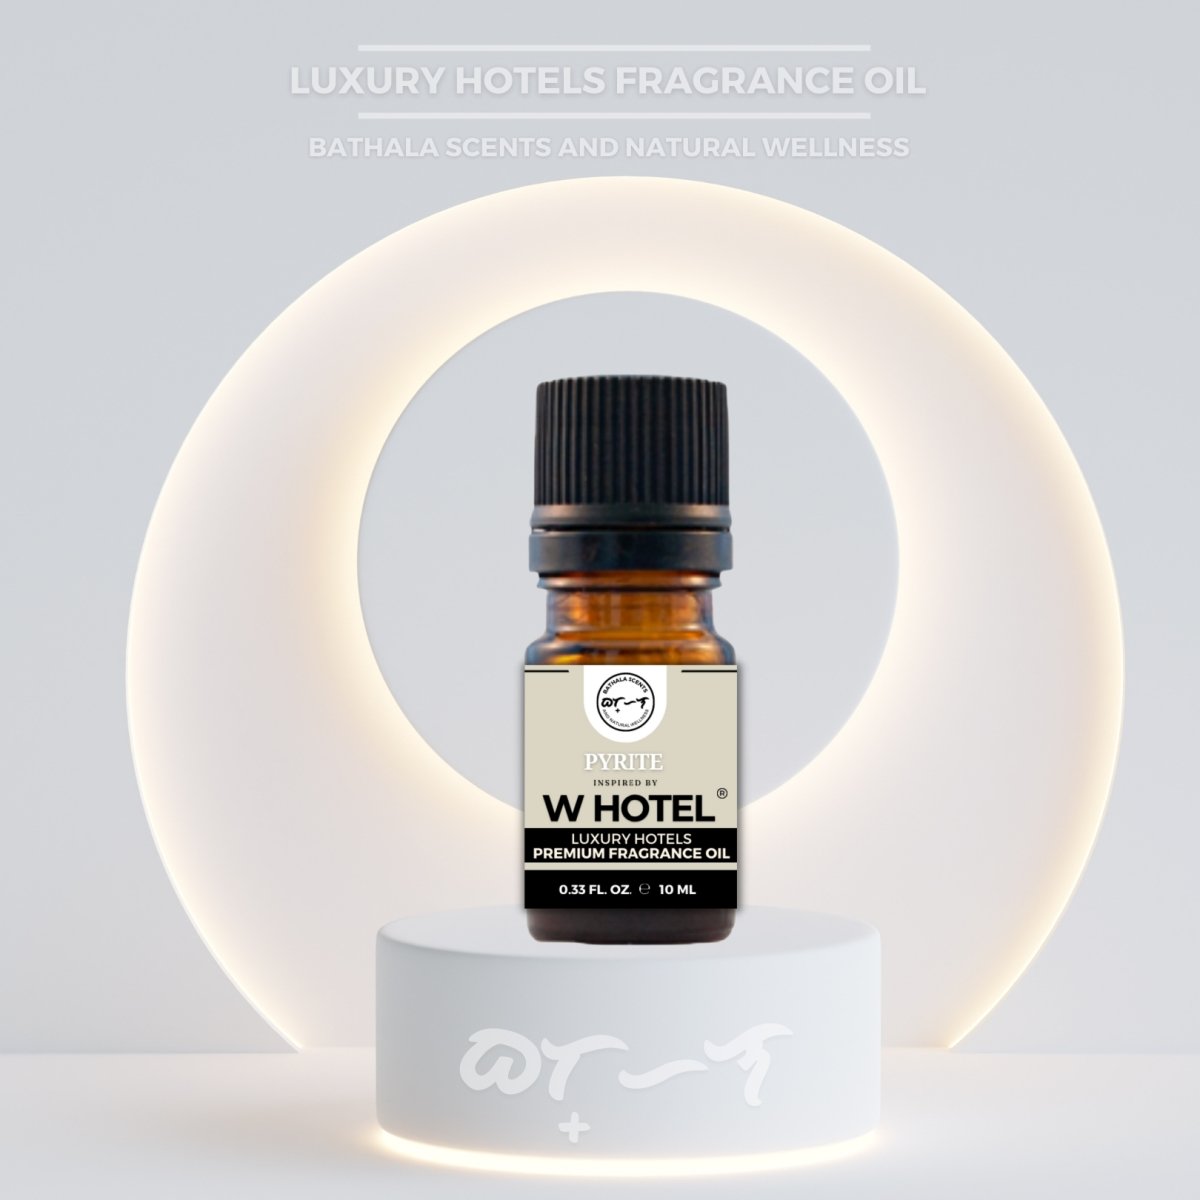 Pyrite Inspired by W Hotel Luxury Hotels Fragrance Oil 10ml - Bathala Scents and Natural Wellness